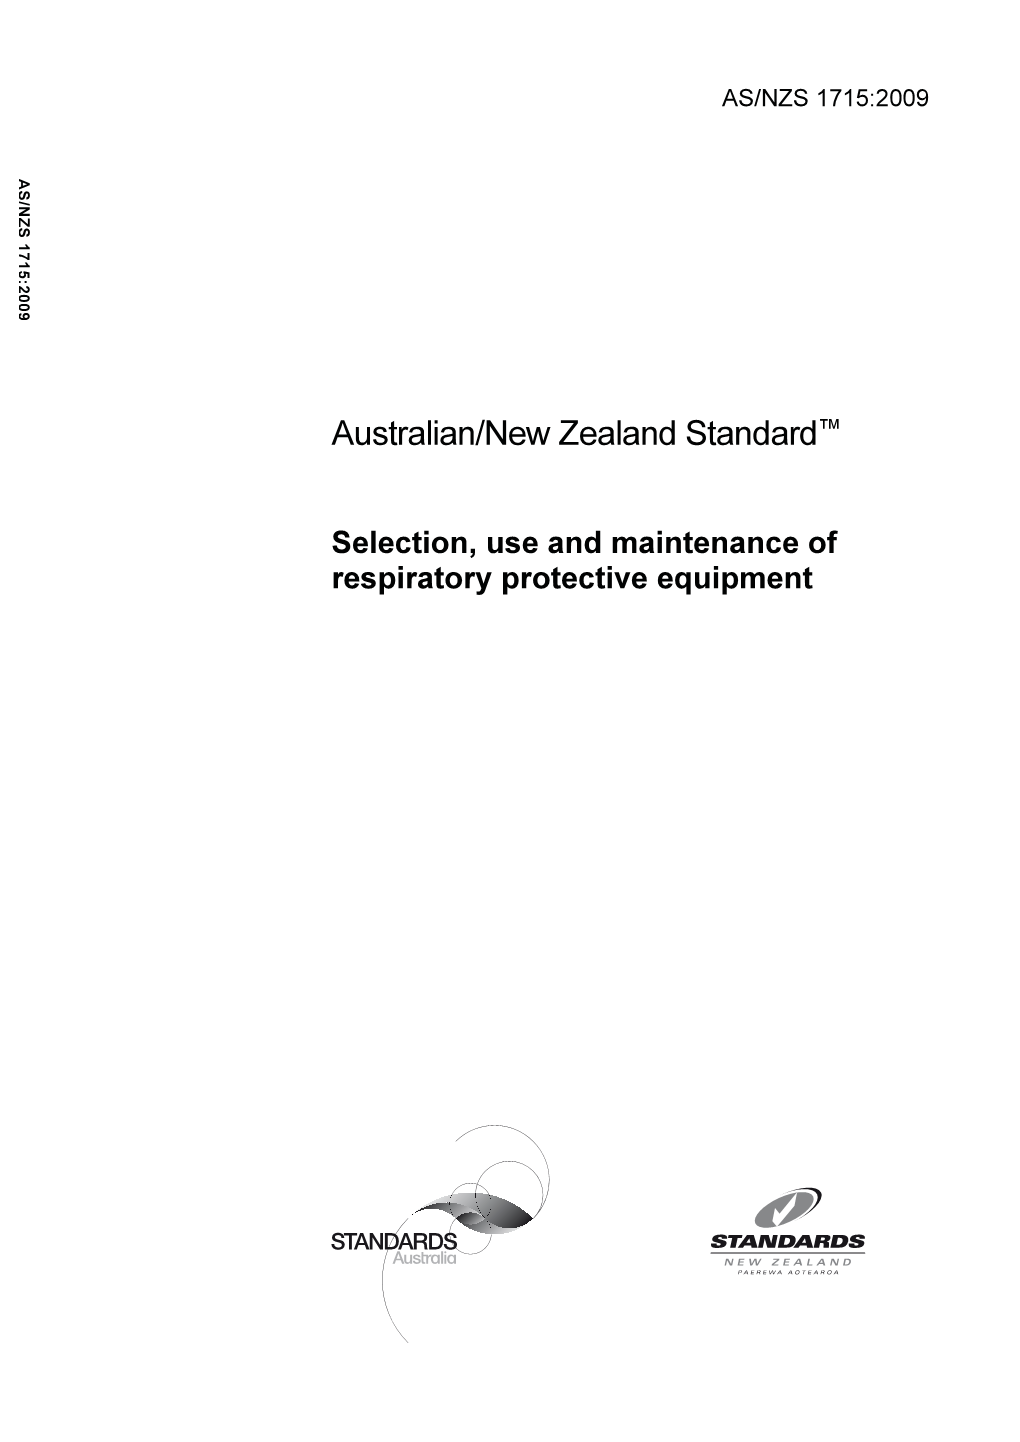 AS/NZS 1715:2009 Selection, Use and Maintenance of Respiratory